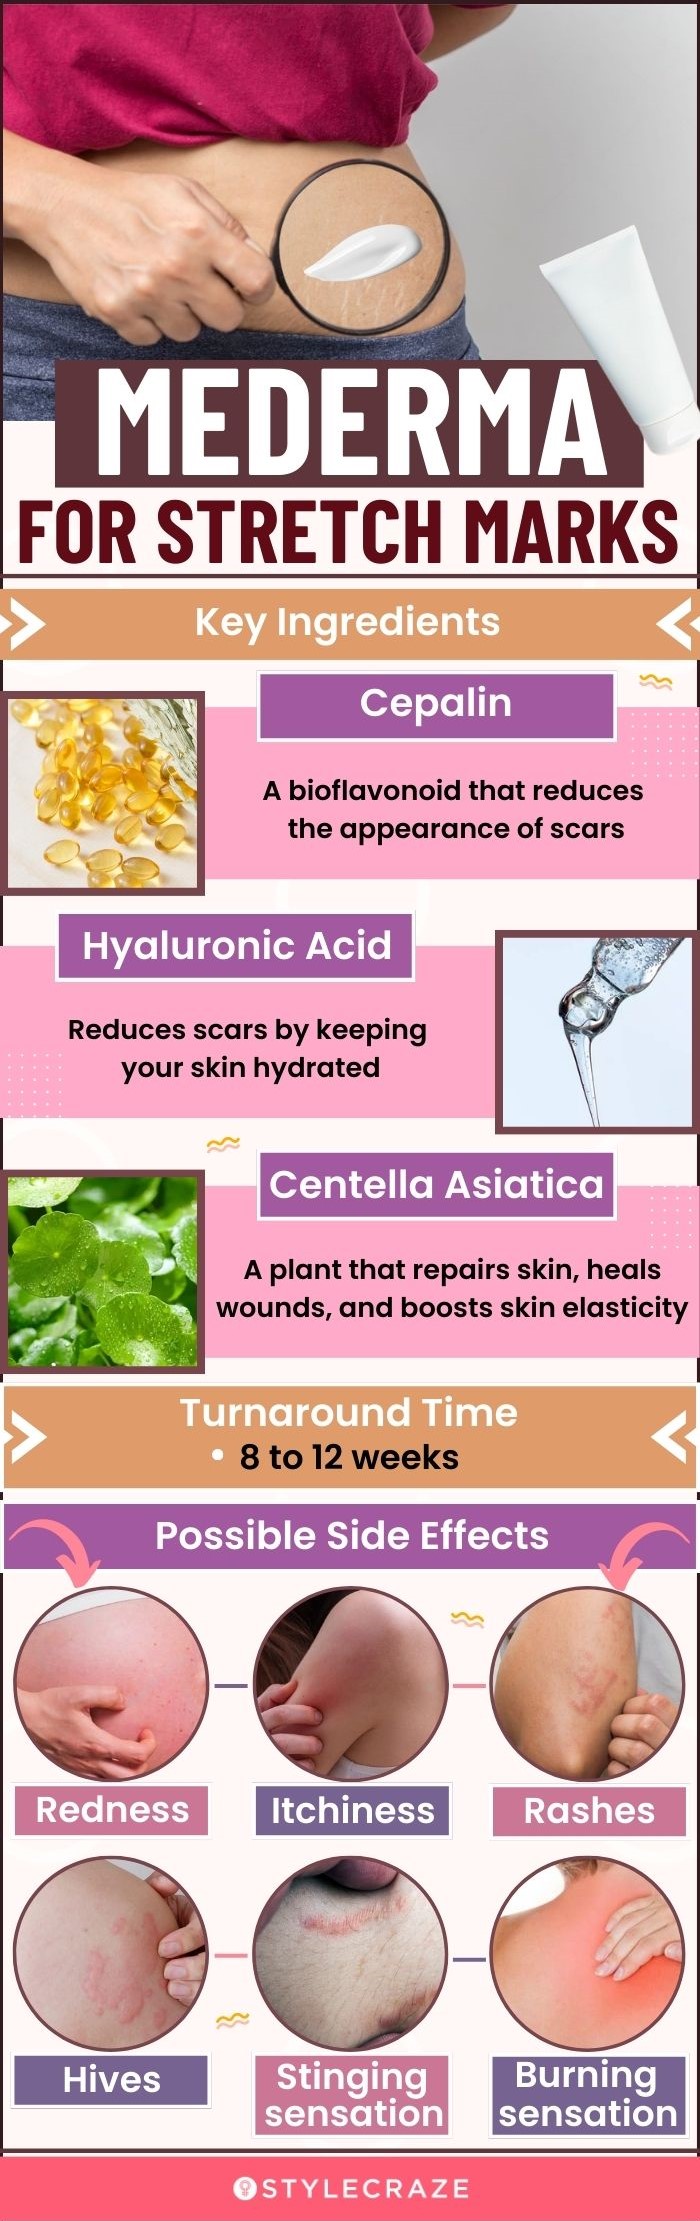 mederma for stretch marks (infographic)